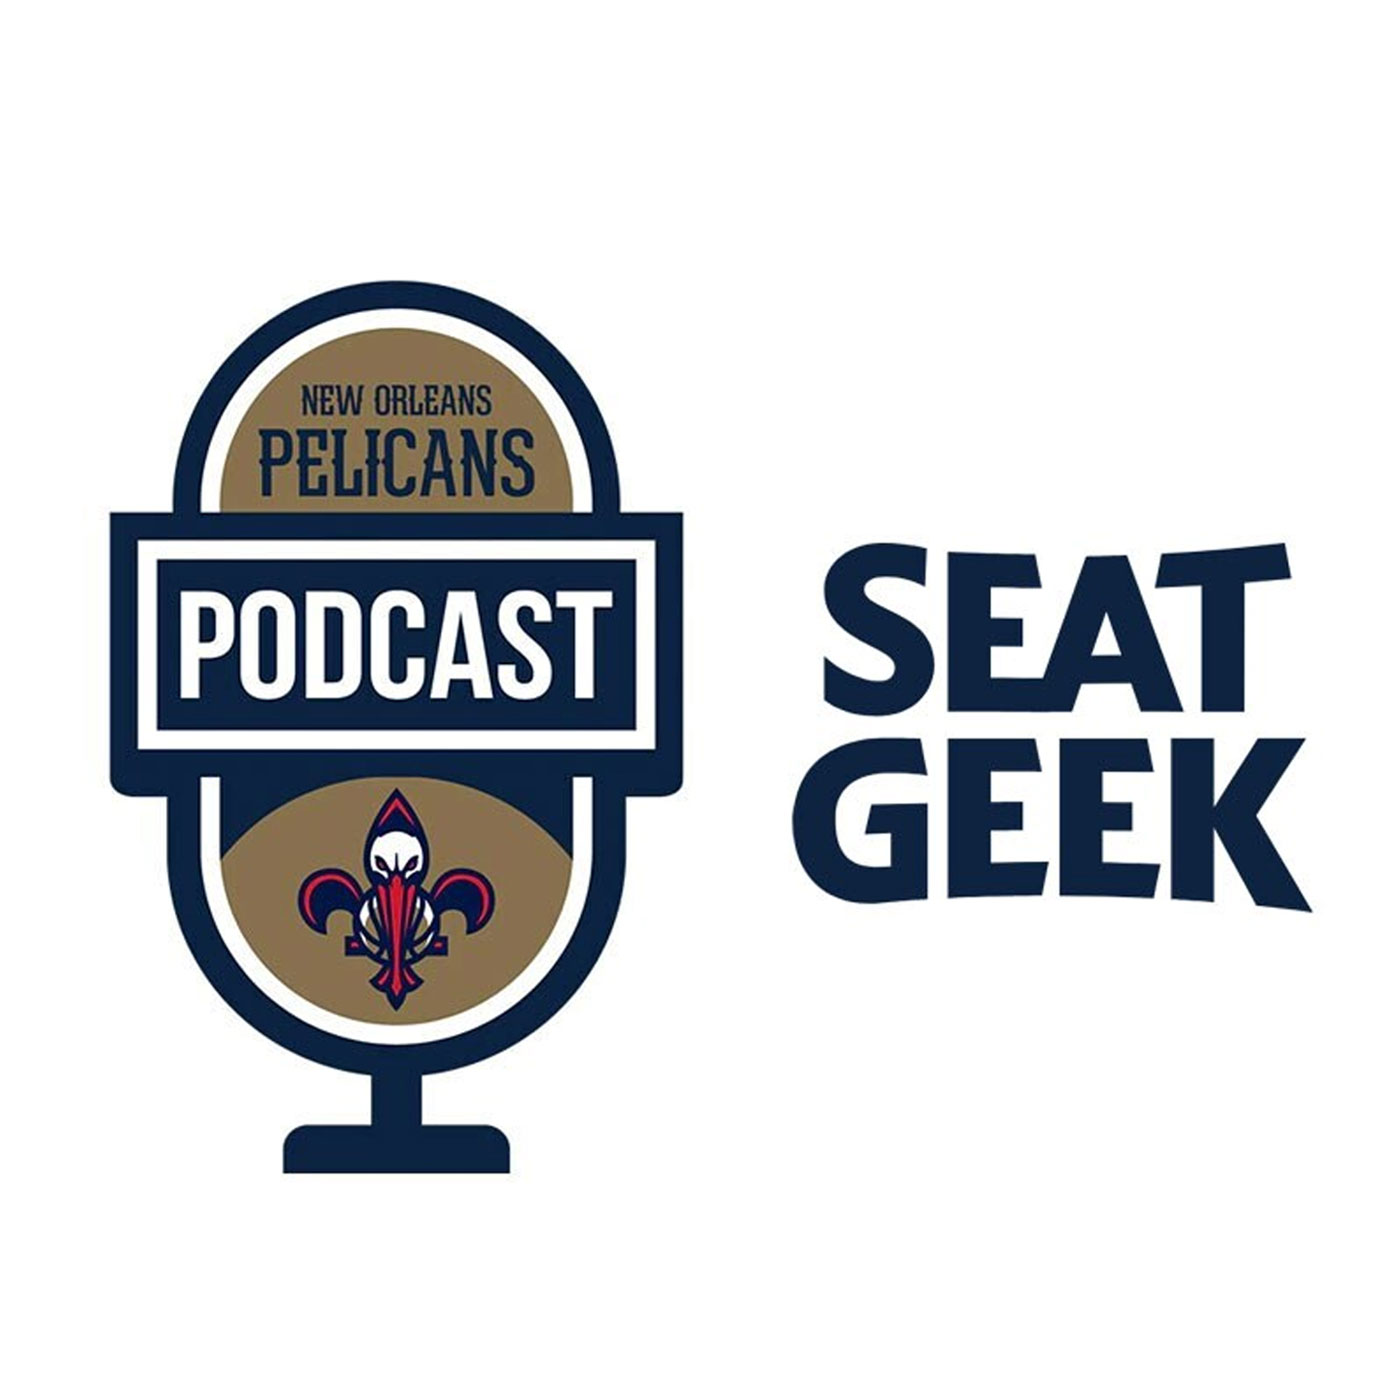 T-Bob Hebert on the New Orleans Pelicans Podcast presented by SeatGeek - January 24, 2022